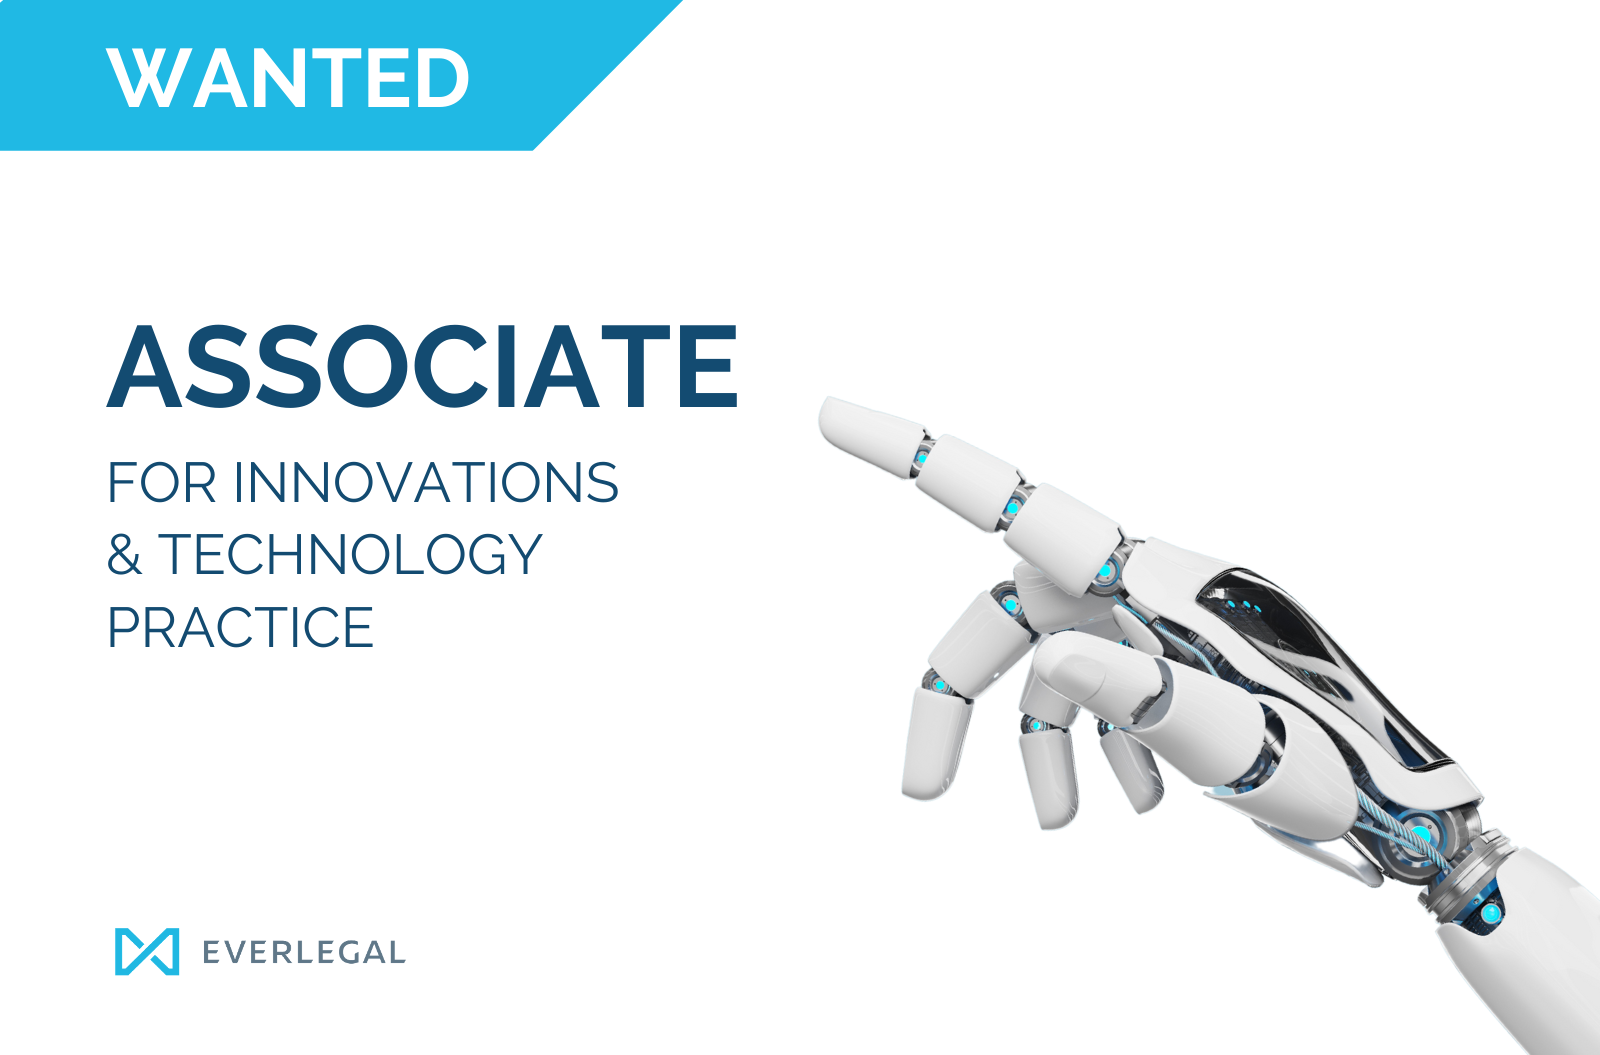 EVERLEGAL is looking for an Associate to join Innovations & Technology Practice 